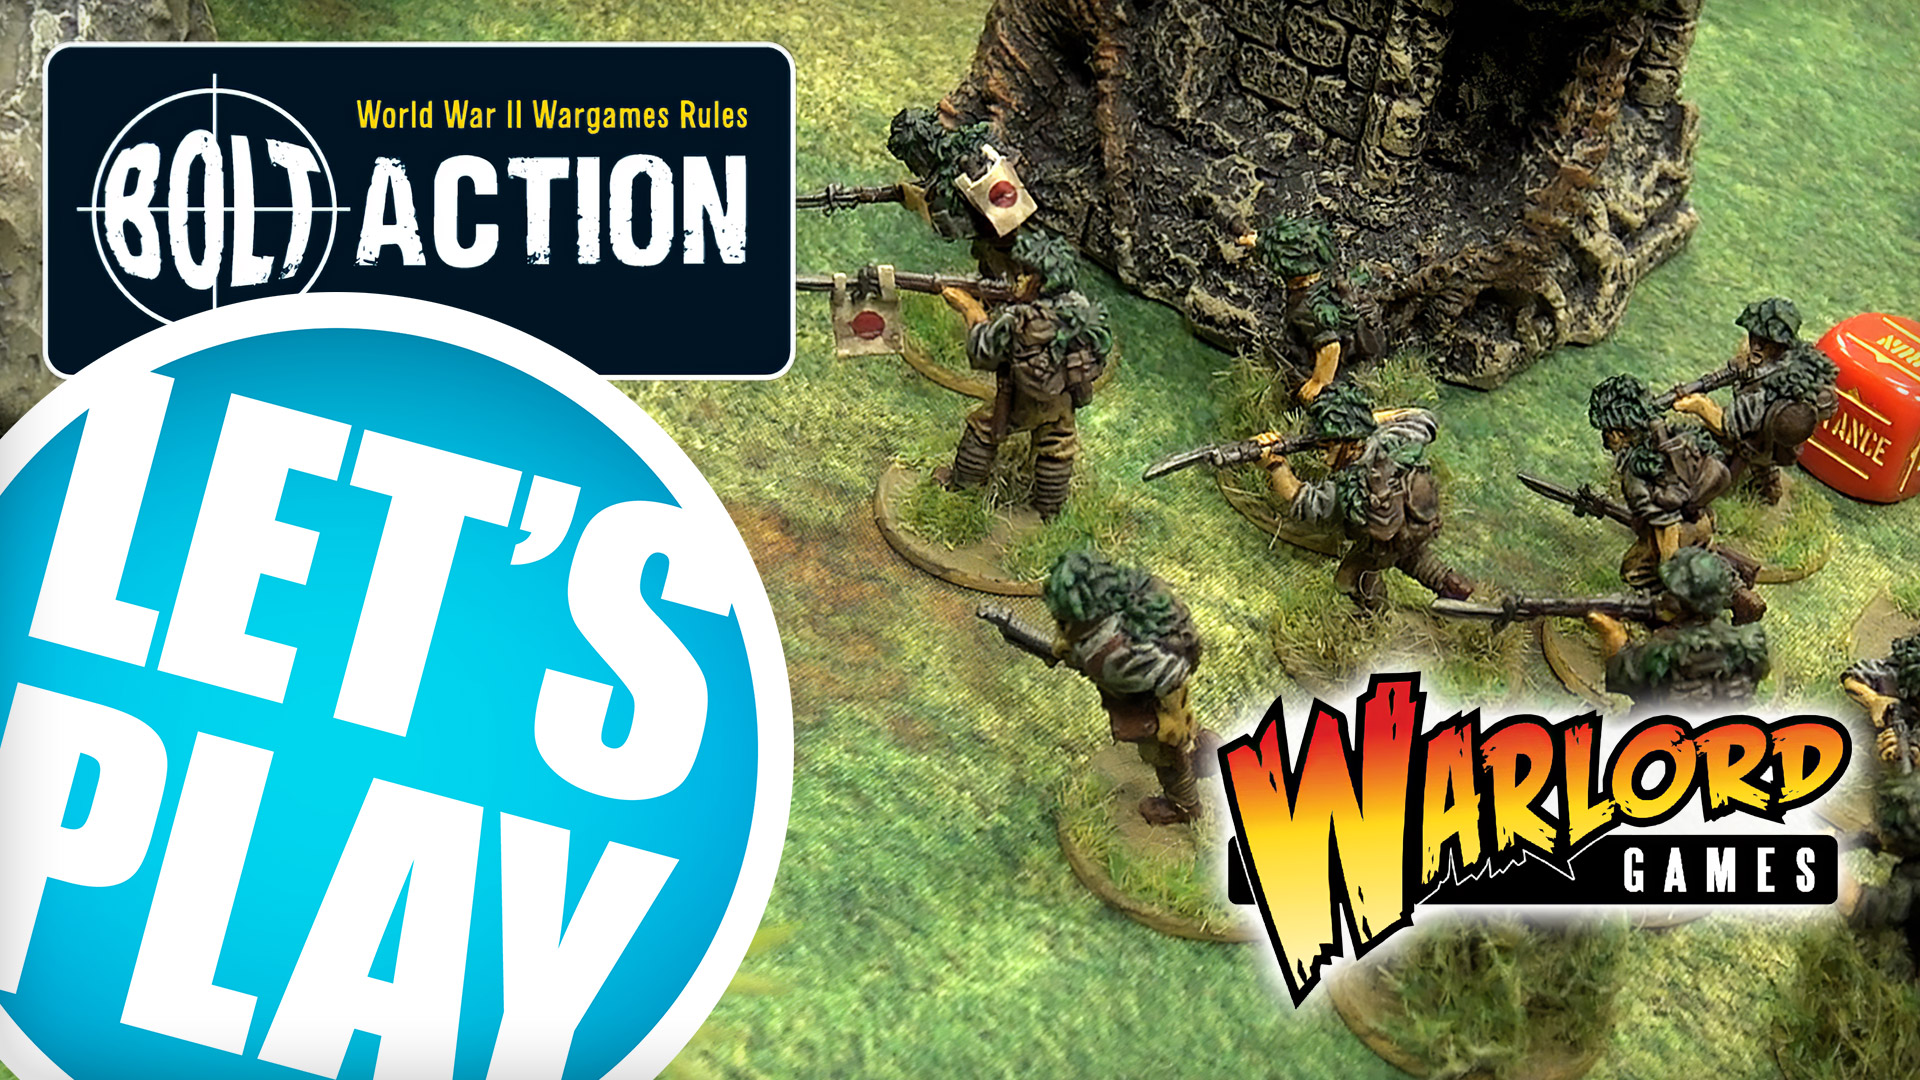 Lets-Play-Bolt-Action---Campaign-Game-1-coverimage